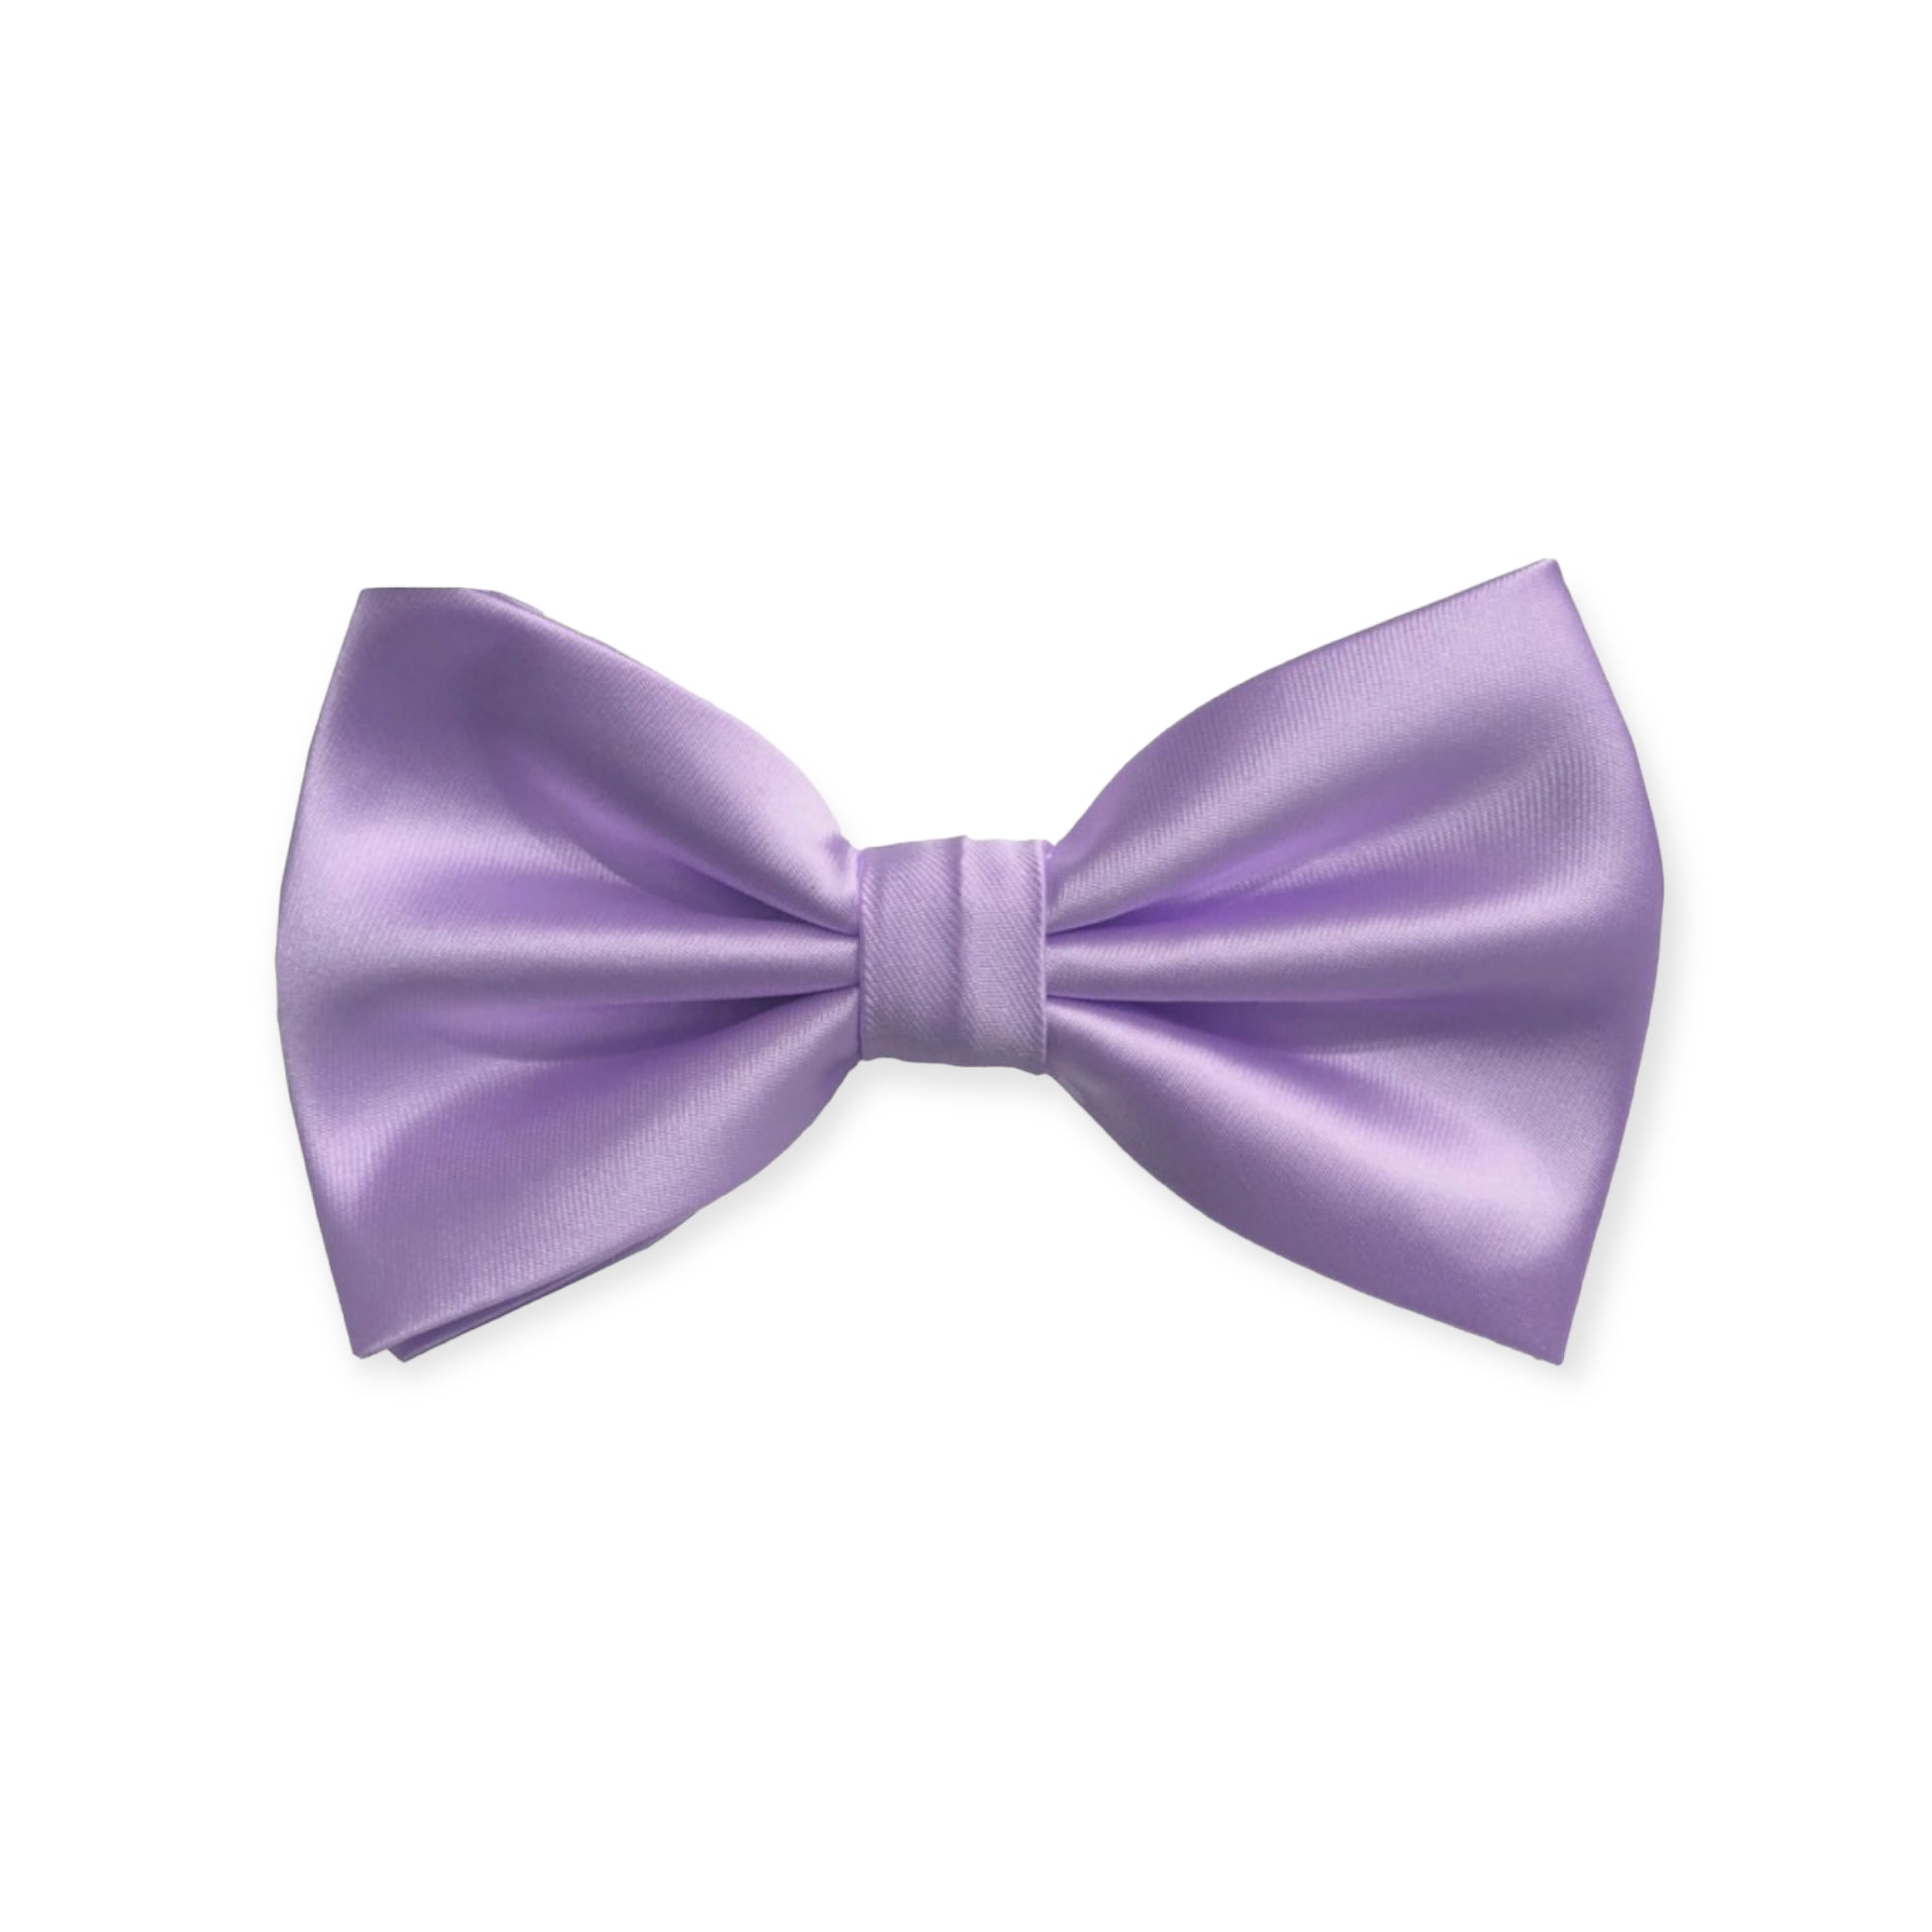 Solid Lilac Bow Tie and Hanky